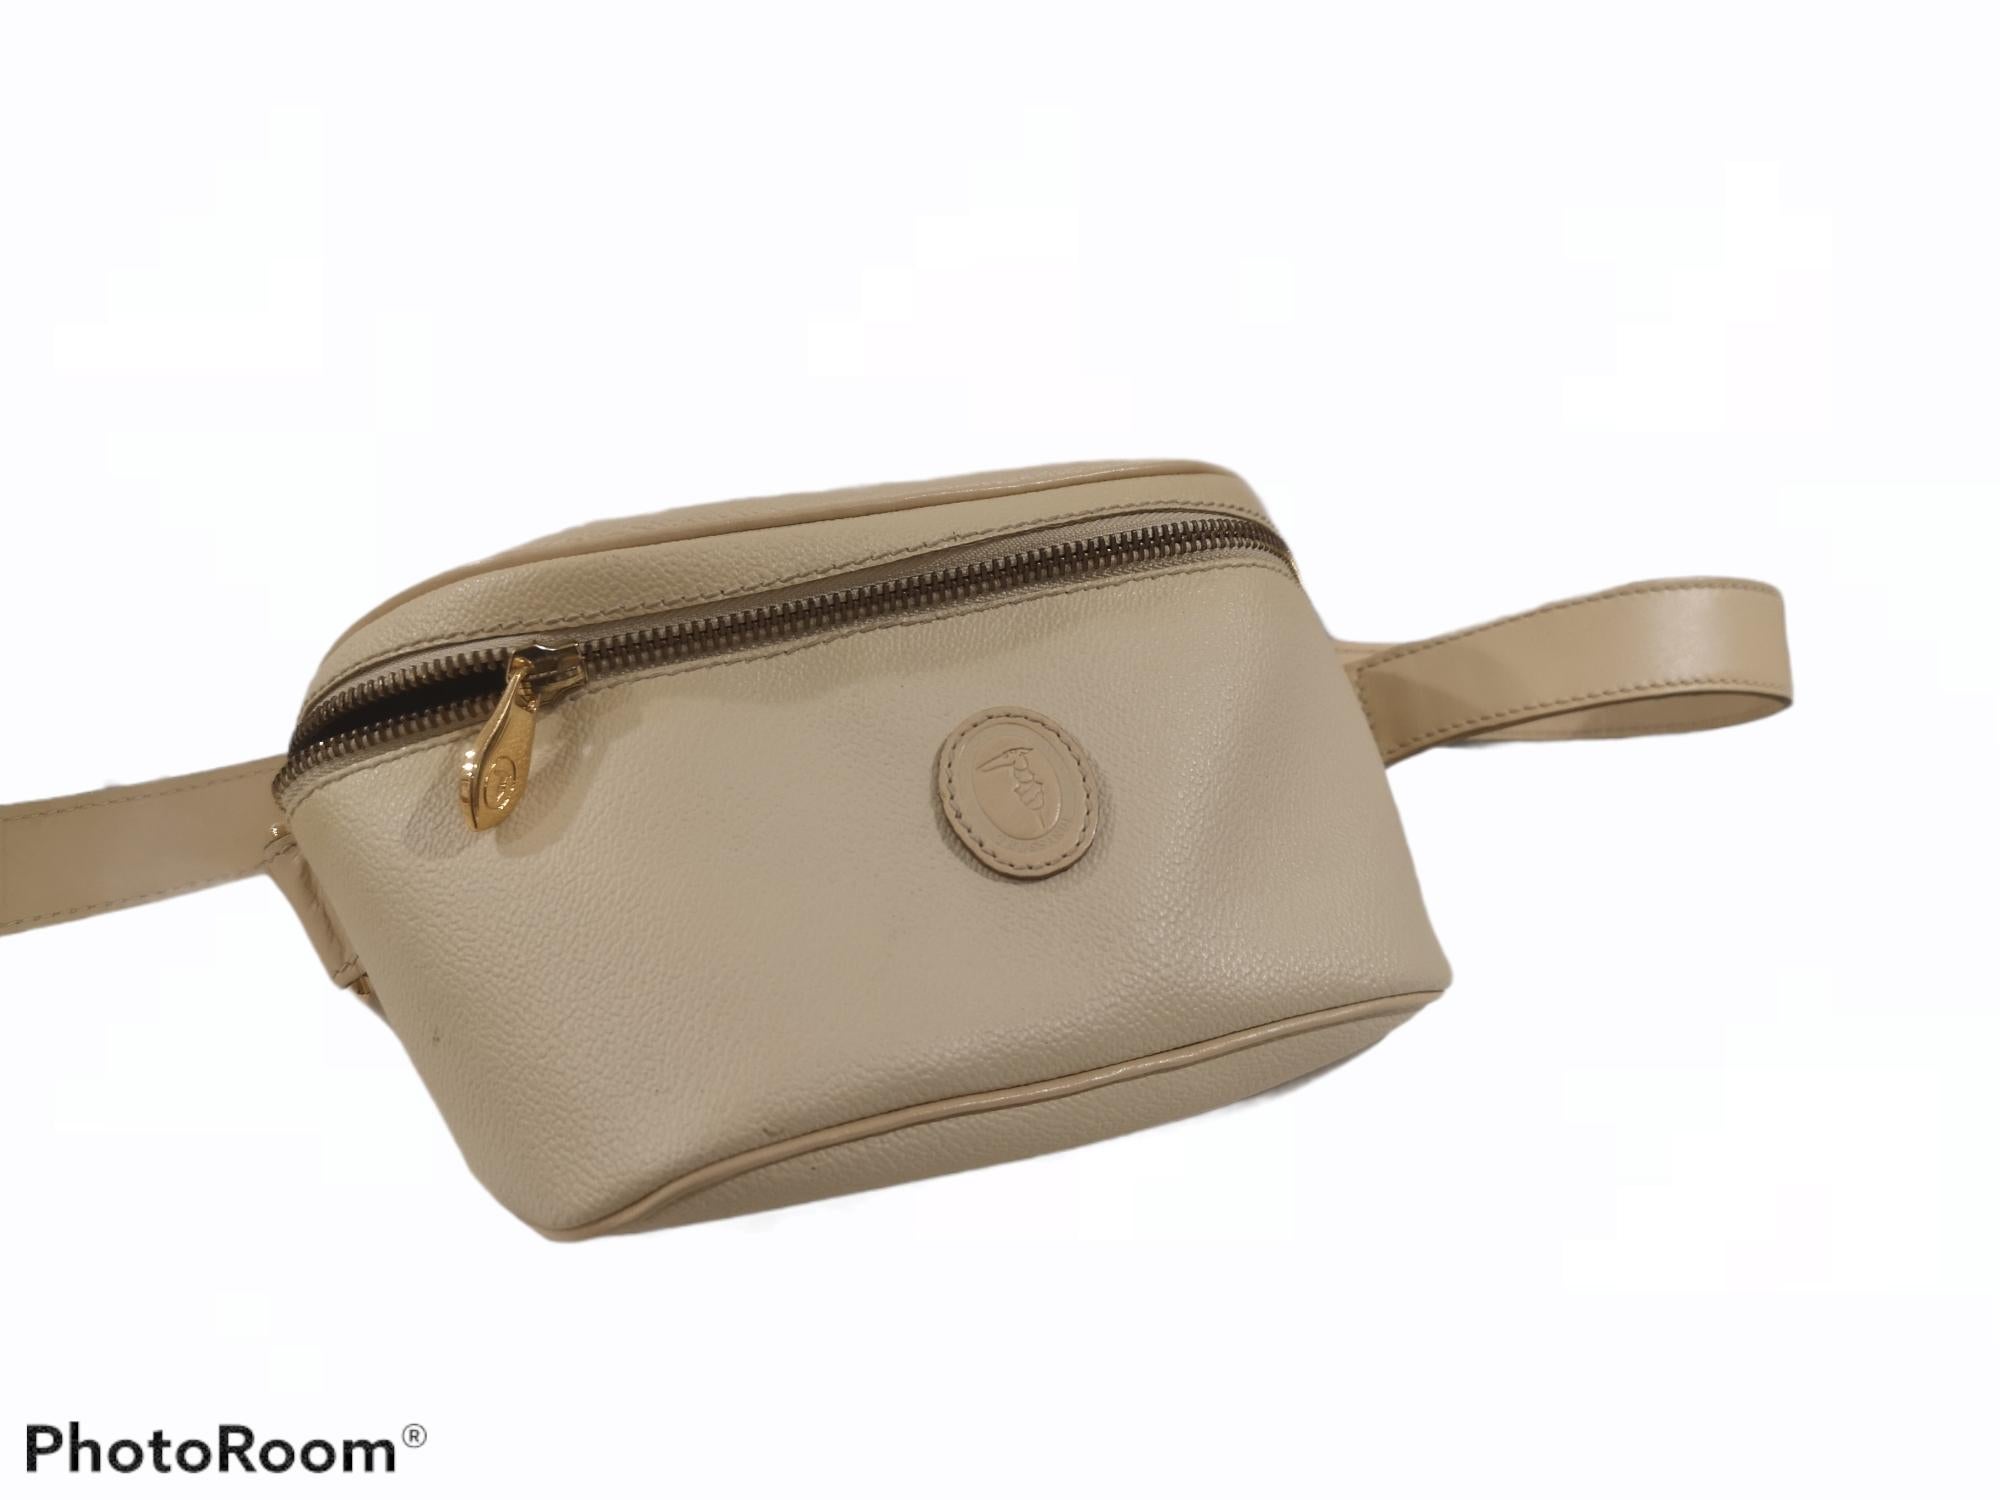 Trussardi cream leather fanny pack 
totally made in italy